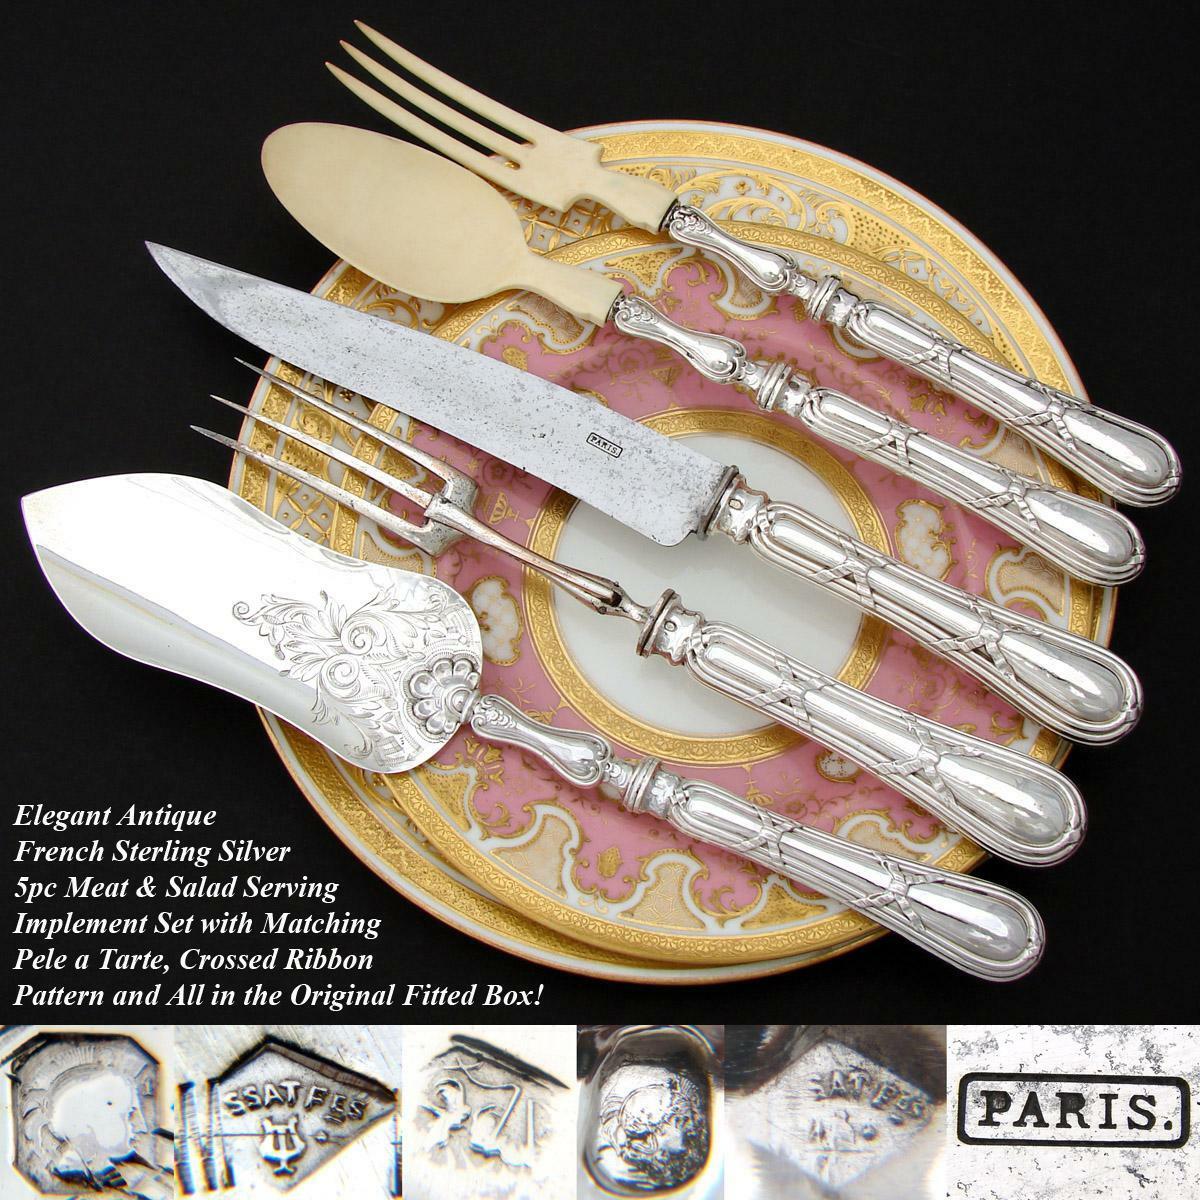 Antique French Sterling Silver 5pc Meat, Salad & Fish Serving Utensil Set, Box